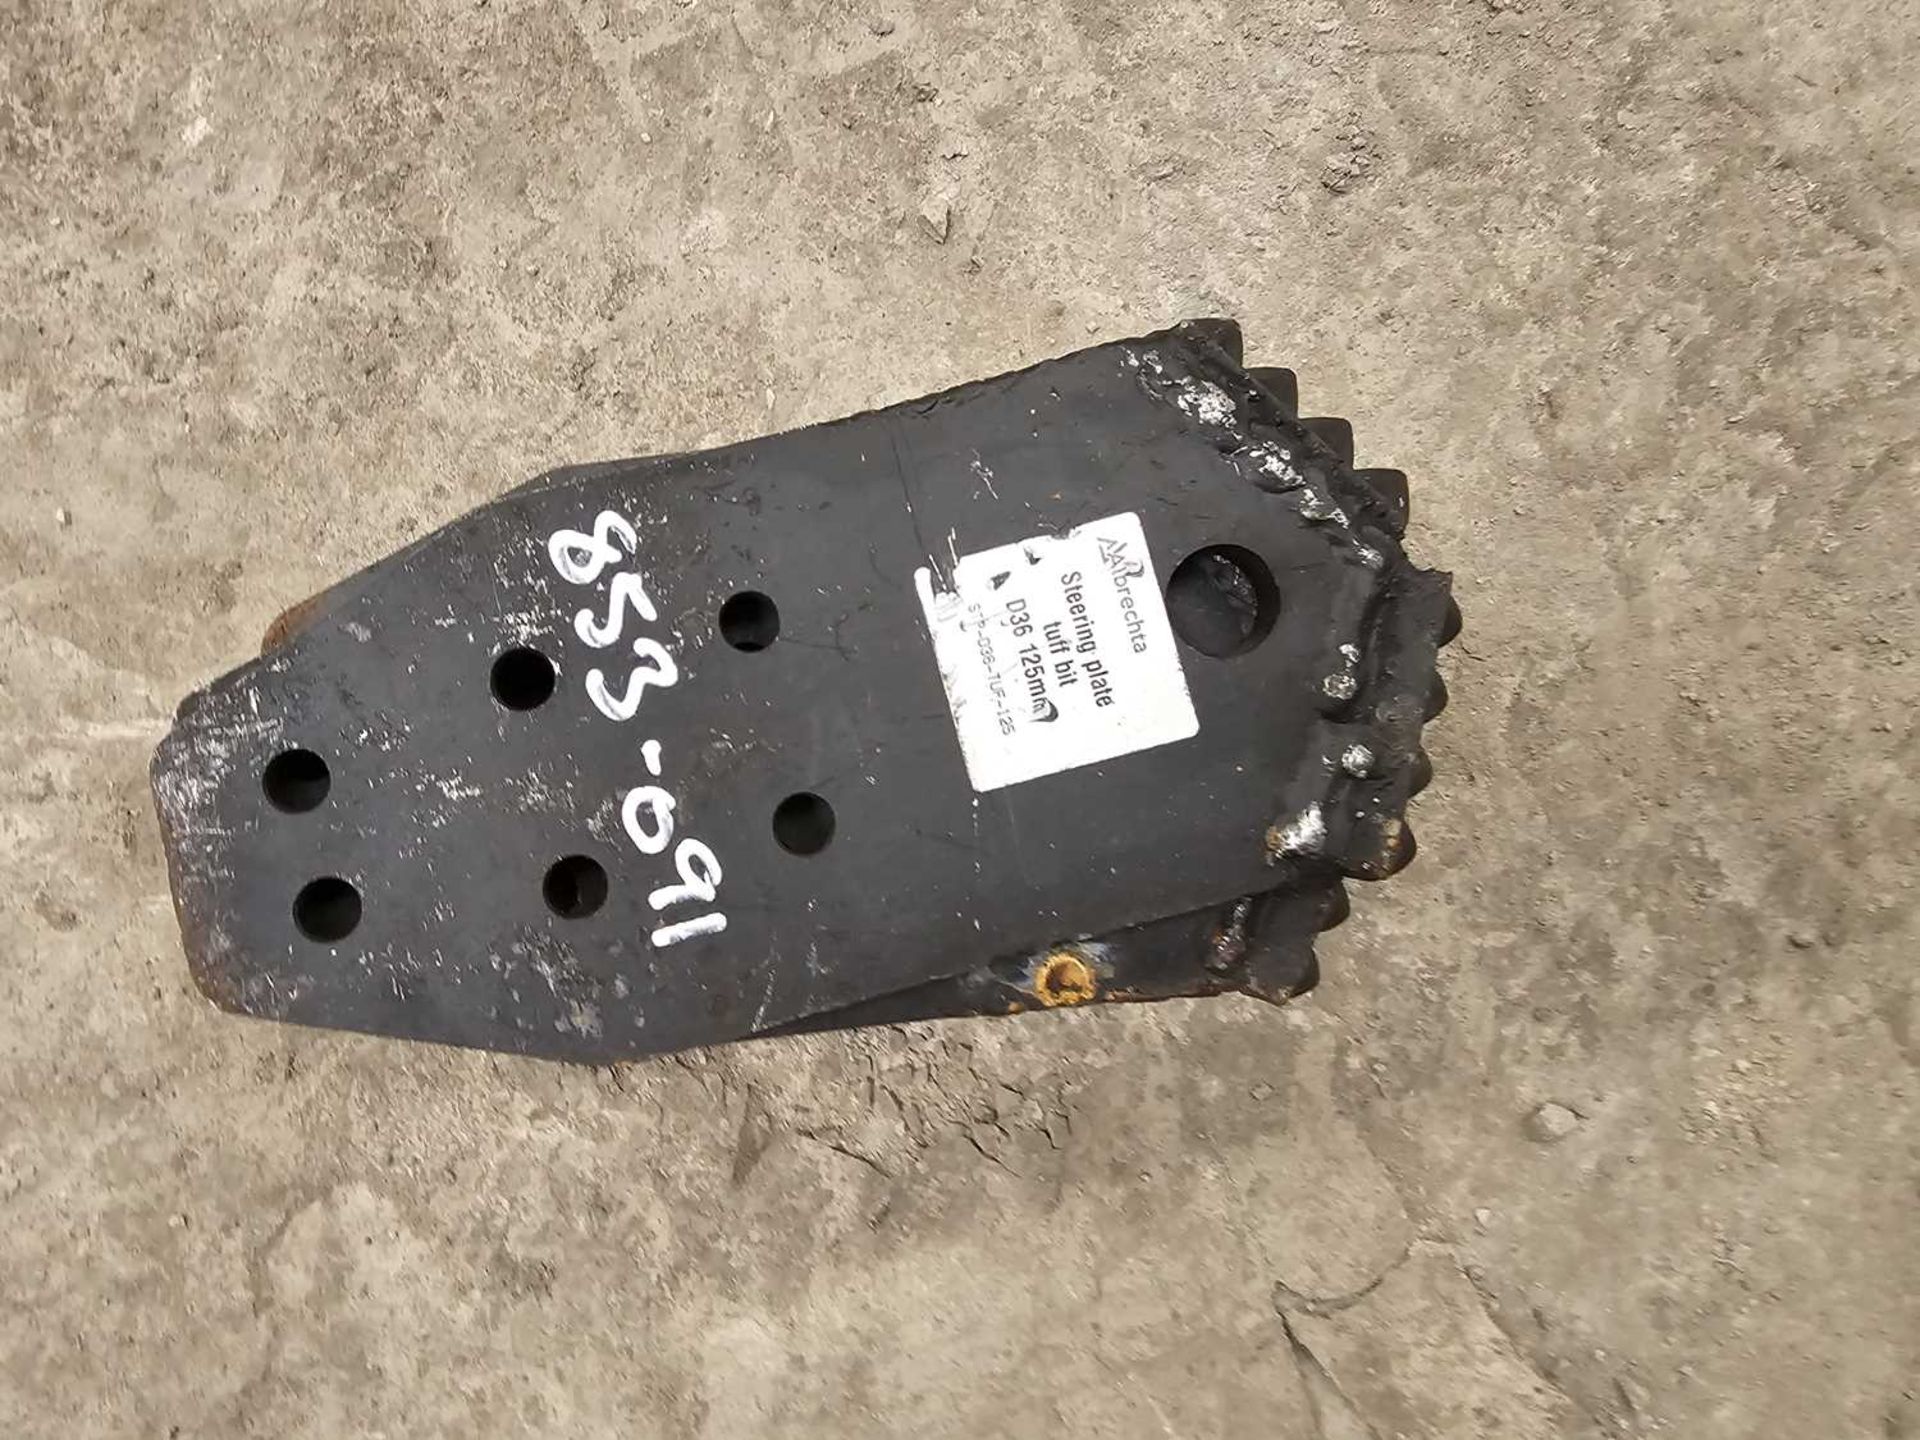 Unused Jagger Blade Steering Plate to suit Trencher (5 of) - Image 2 of 3